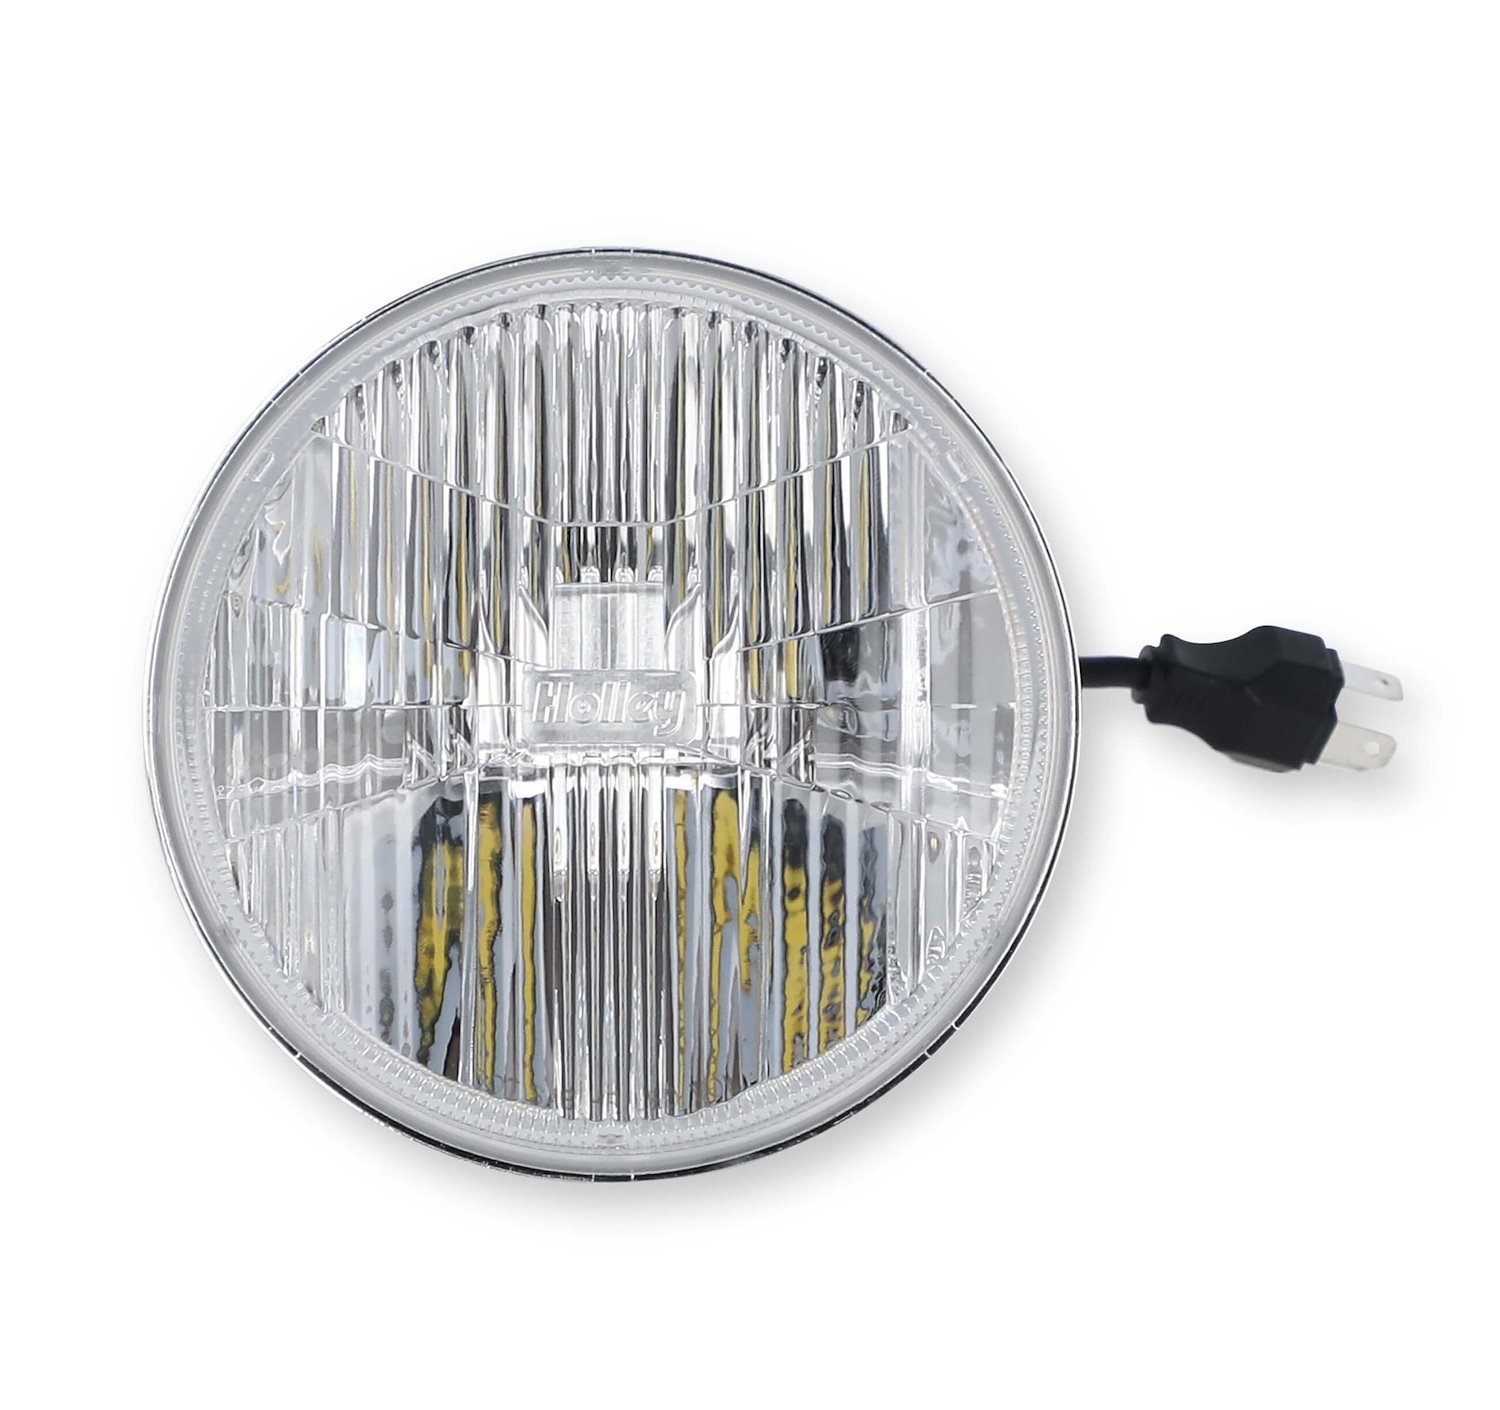 LFRB145 LFRB145 RetroBright LED 5 3/4 in. Round Headlight for Select 1957-1992 Vehicles with 4-Headlight System  [Modern White]